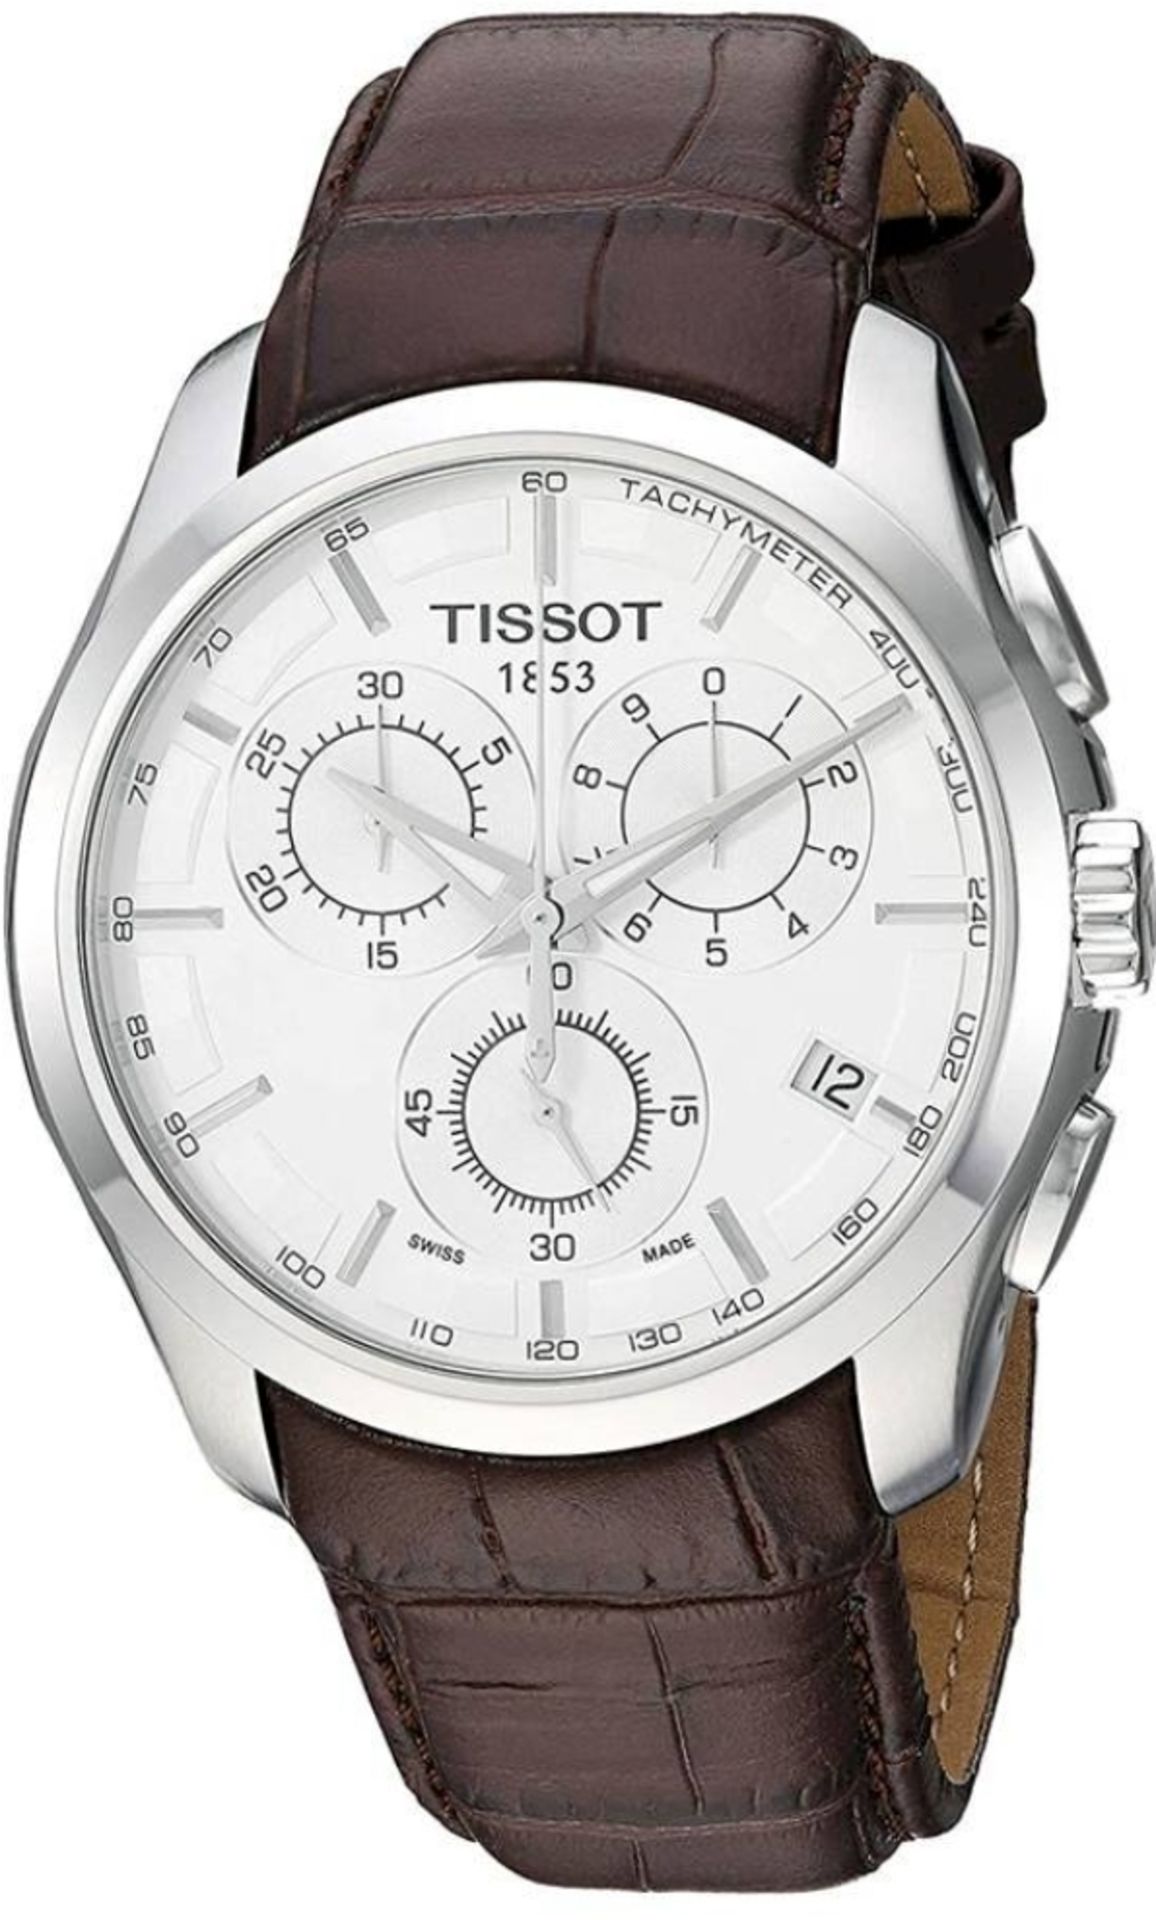 Tissot - Couturier Chronograph - T035.617.16.031.00 - Men's Watch - Image 5 of 8